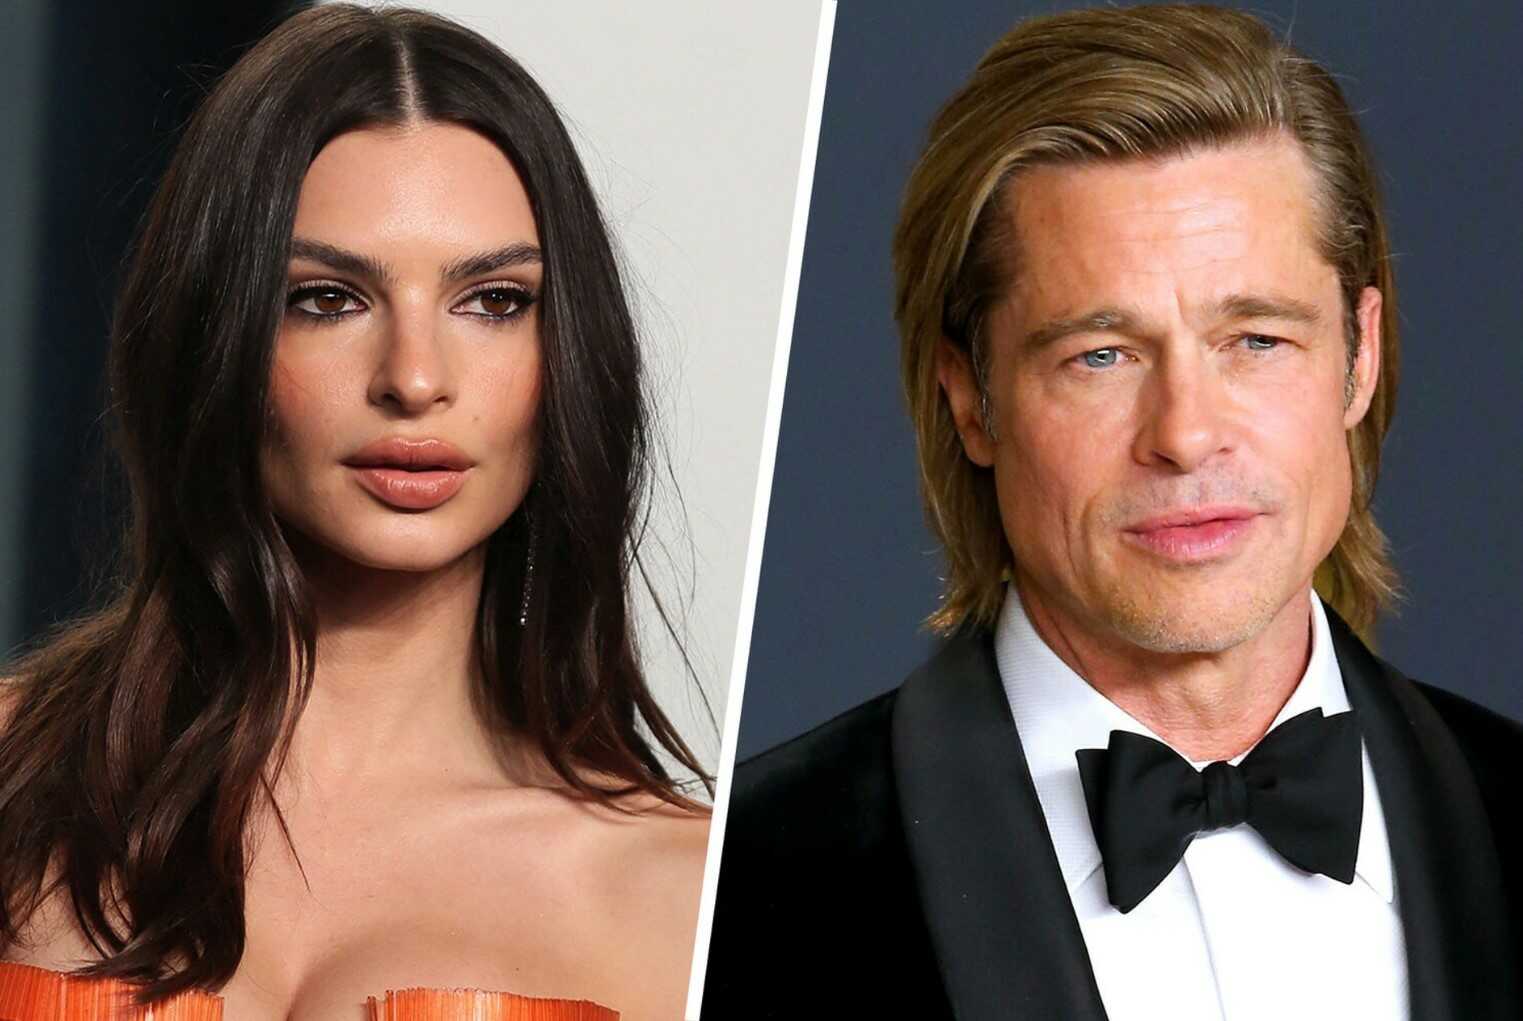 Emily Ratajkowski, amid rumors of an affair with Brad Pitt, moved out of her family home 5